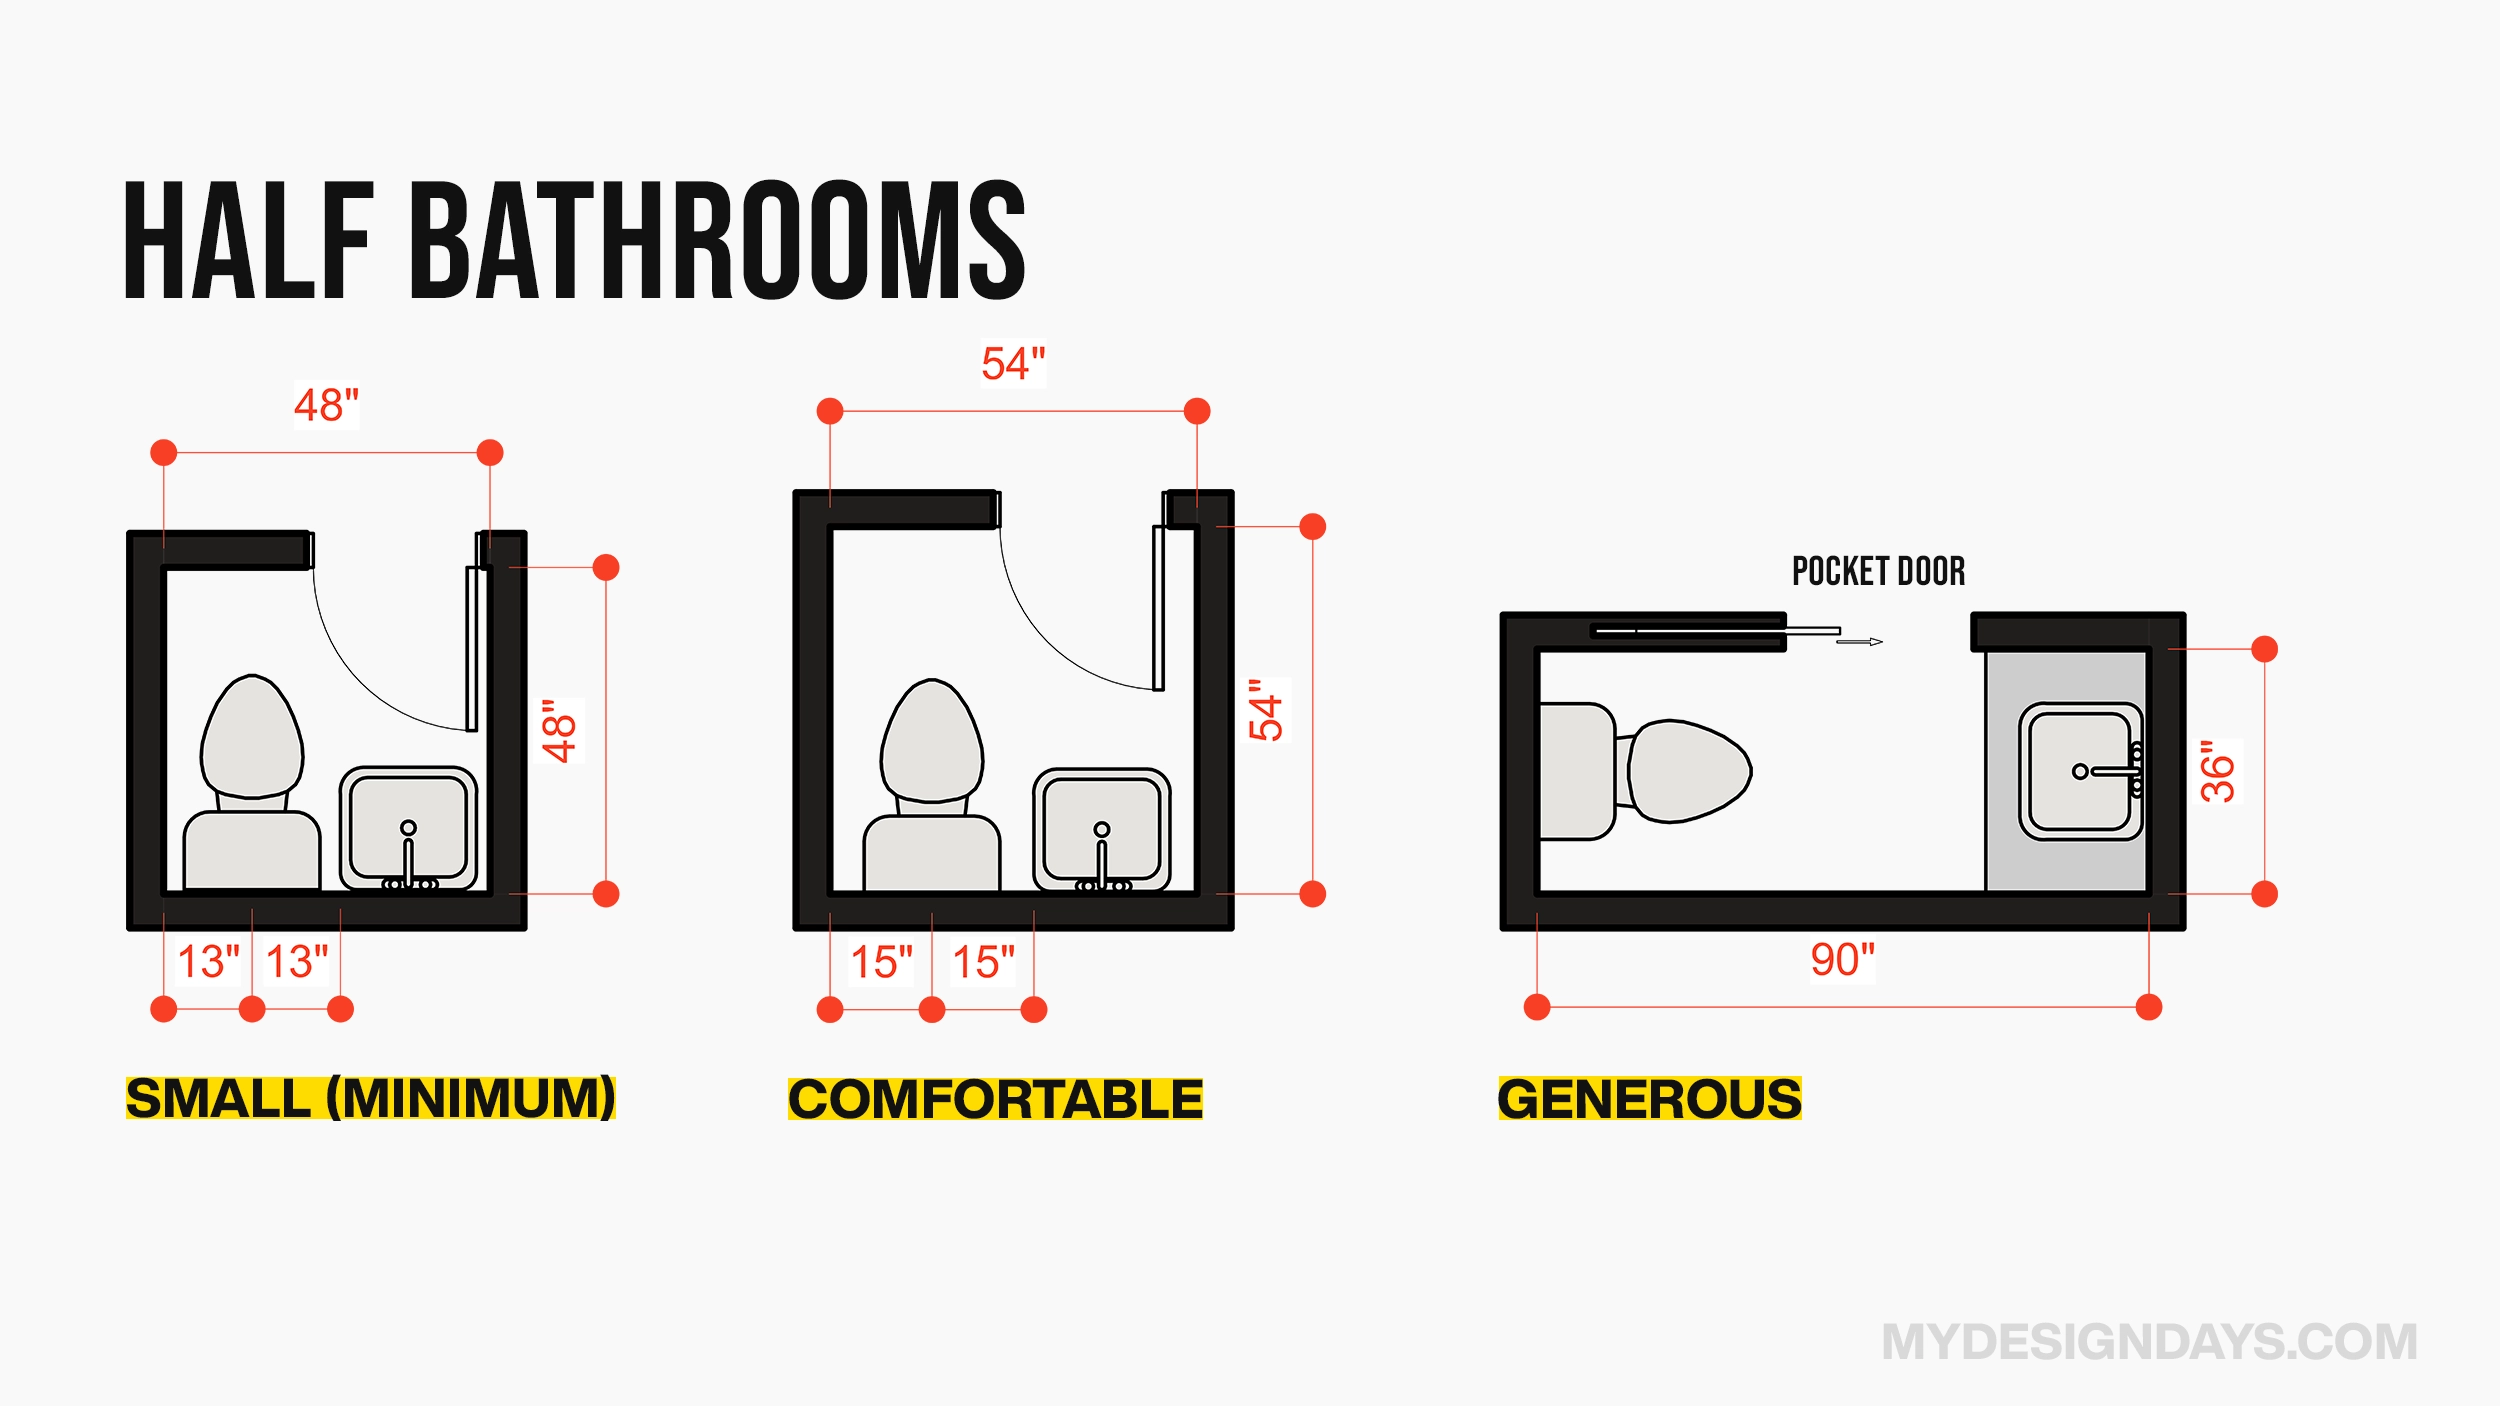 Half bathroom layouts in Inches